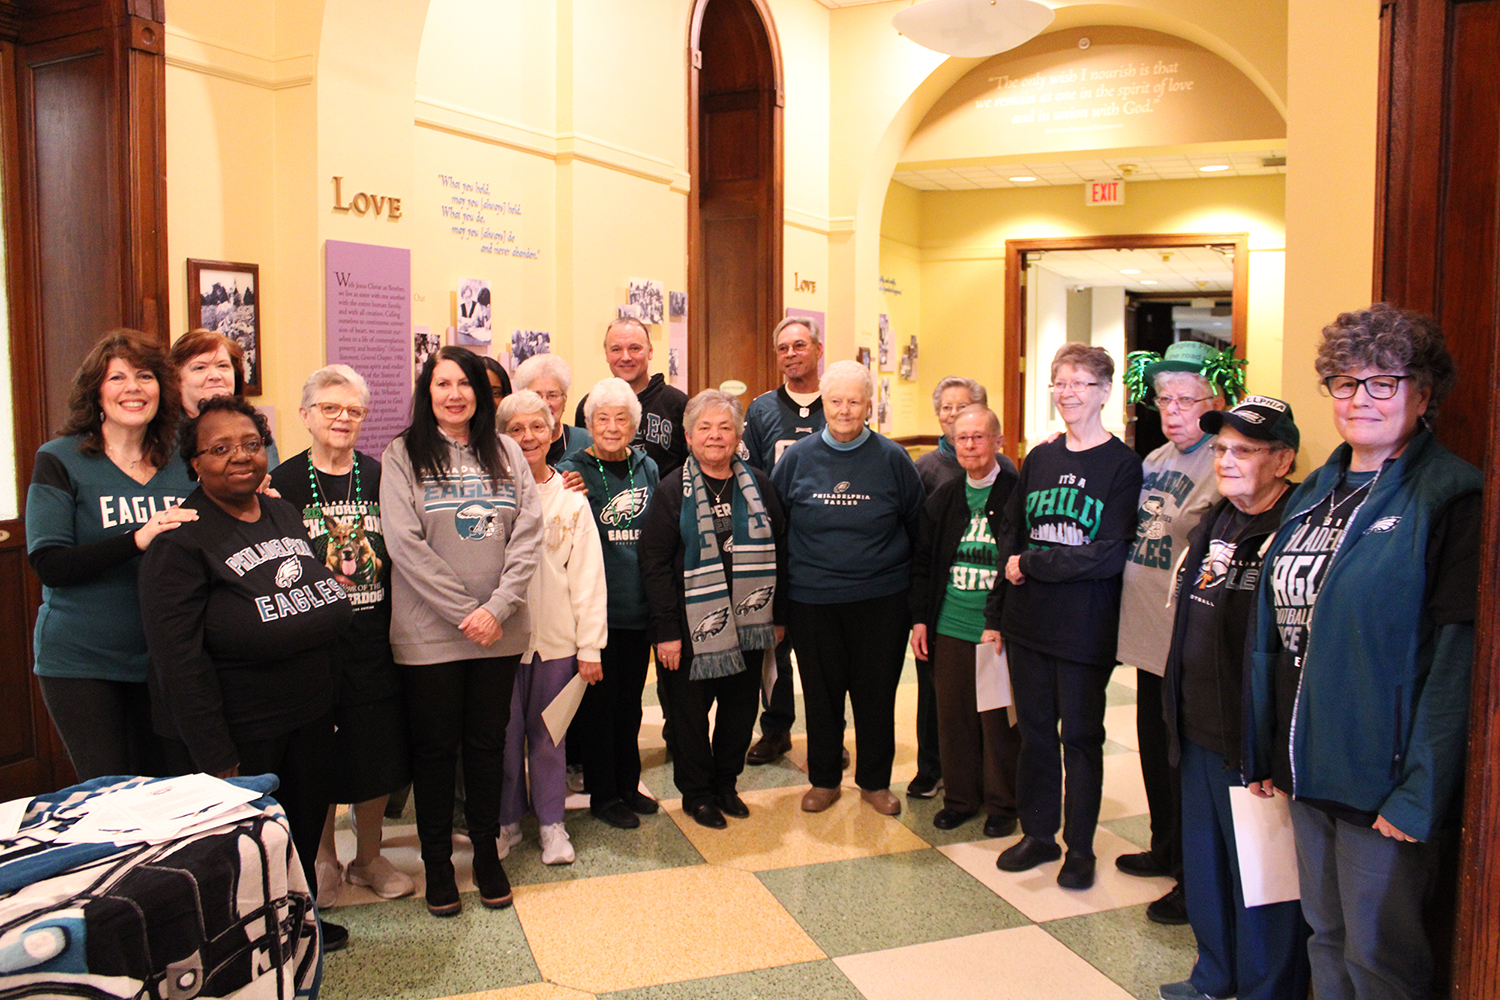 Sisters and staff gather to recite a prayer composed by Sr. Ann Marie Slavin in honor of the Birds and their upcoming trip to the Super Bowl. Courtesy of Sisters of St. Francis of Philadelphia